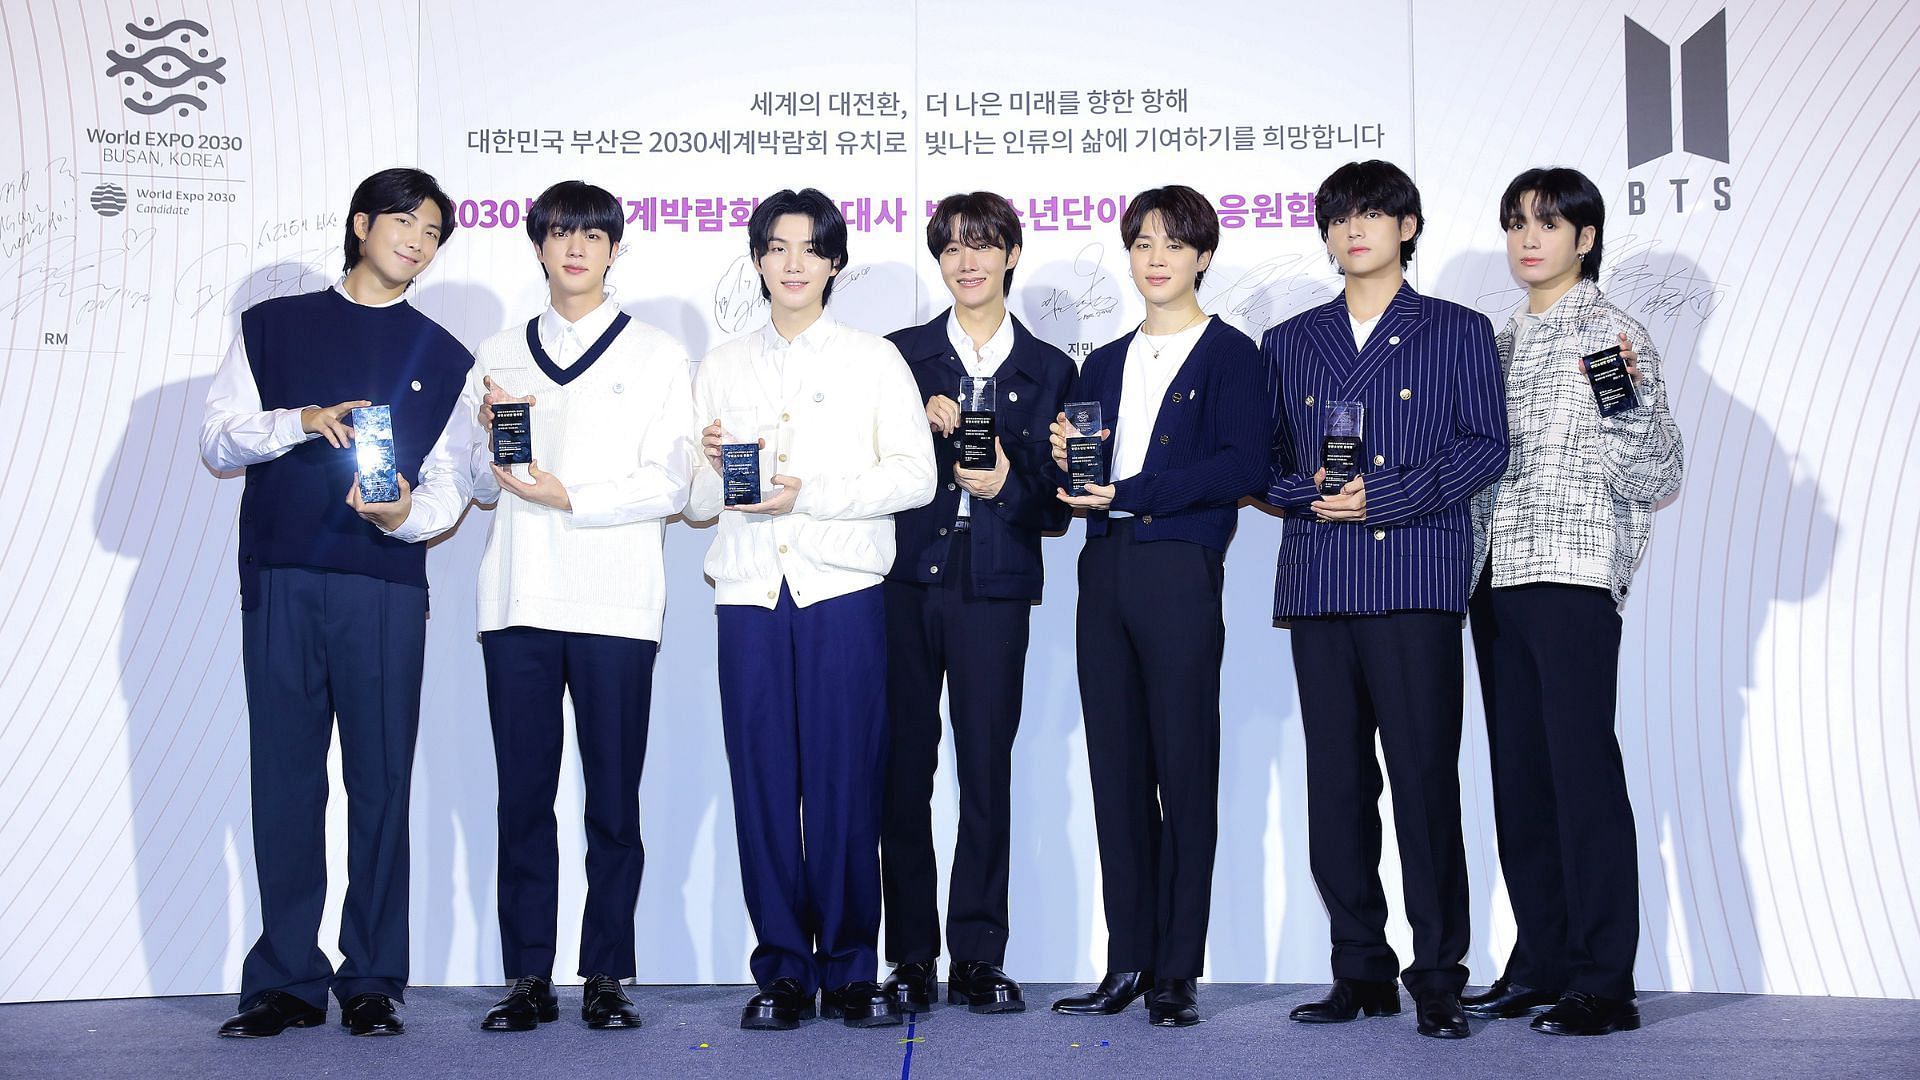 BTS receive plaques after officially being appointed as global abassadors for World Expo 2030 Busan (Image via BIGHIT MUSIC)